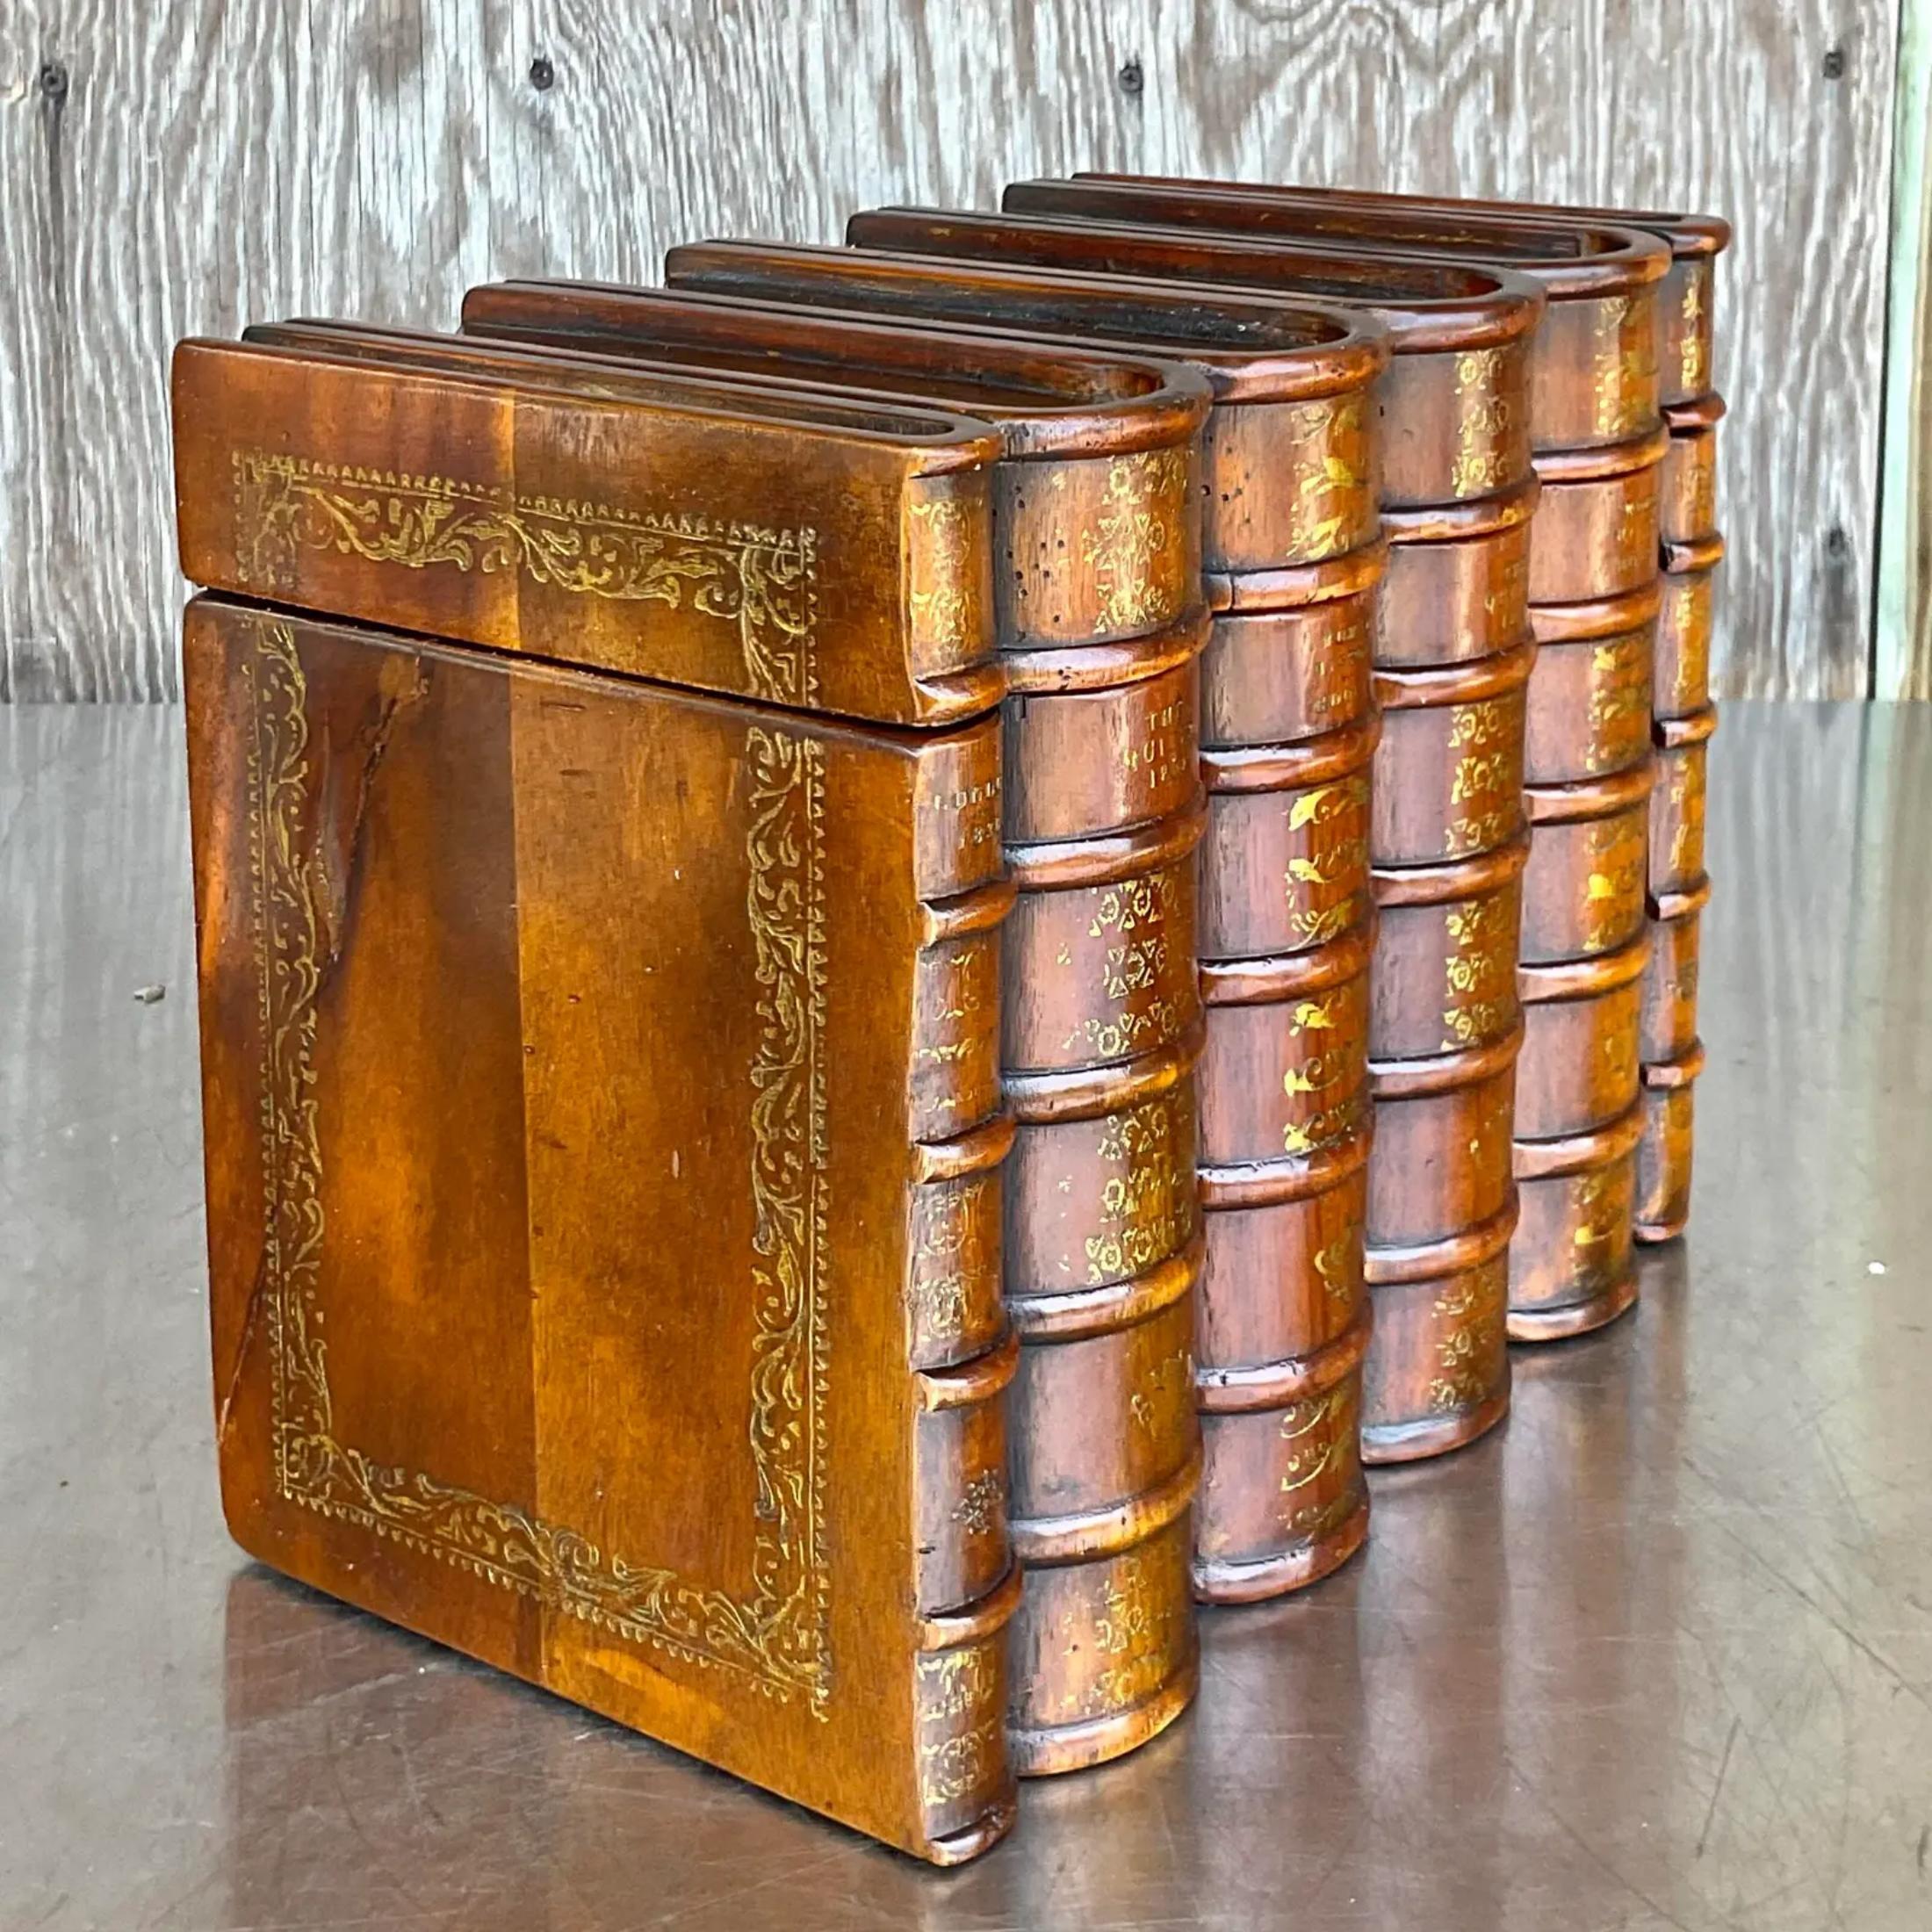 A fantastic and practical vintage box that resembles faux leather bound books made out of wood. Acquired at a Palm Beach estate